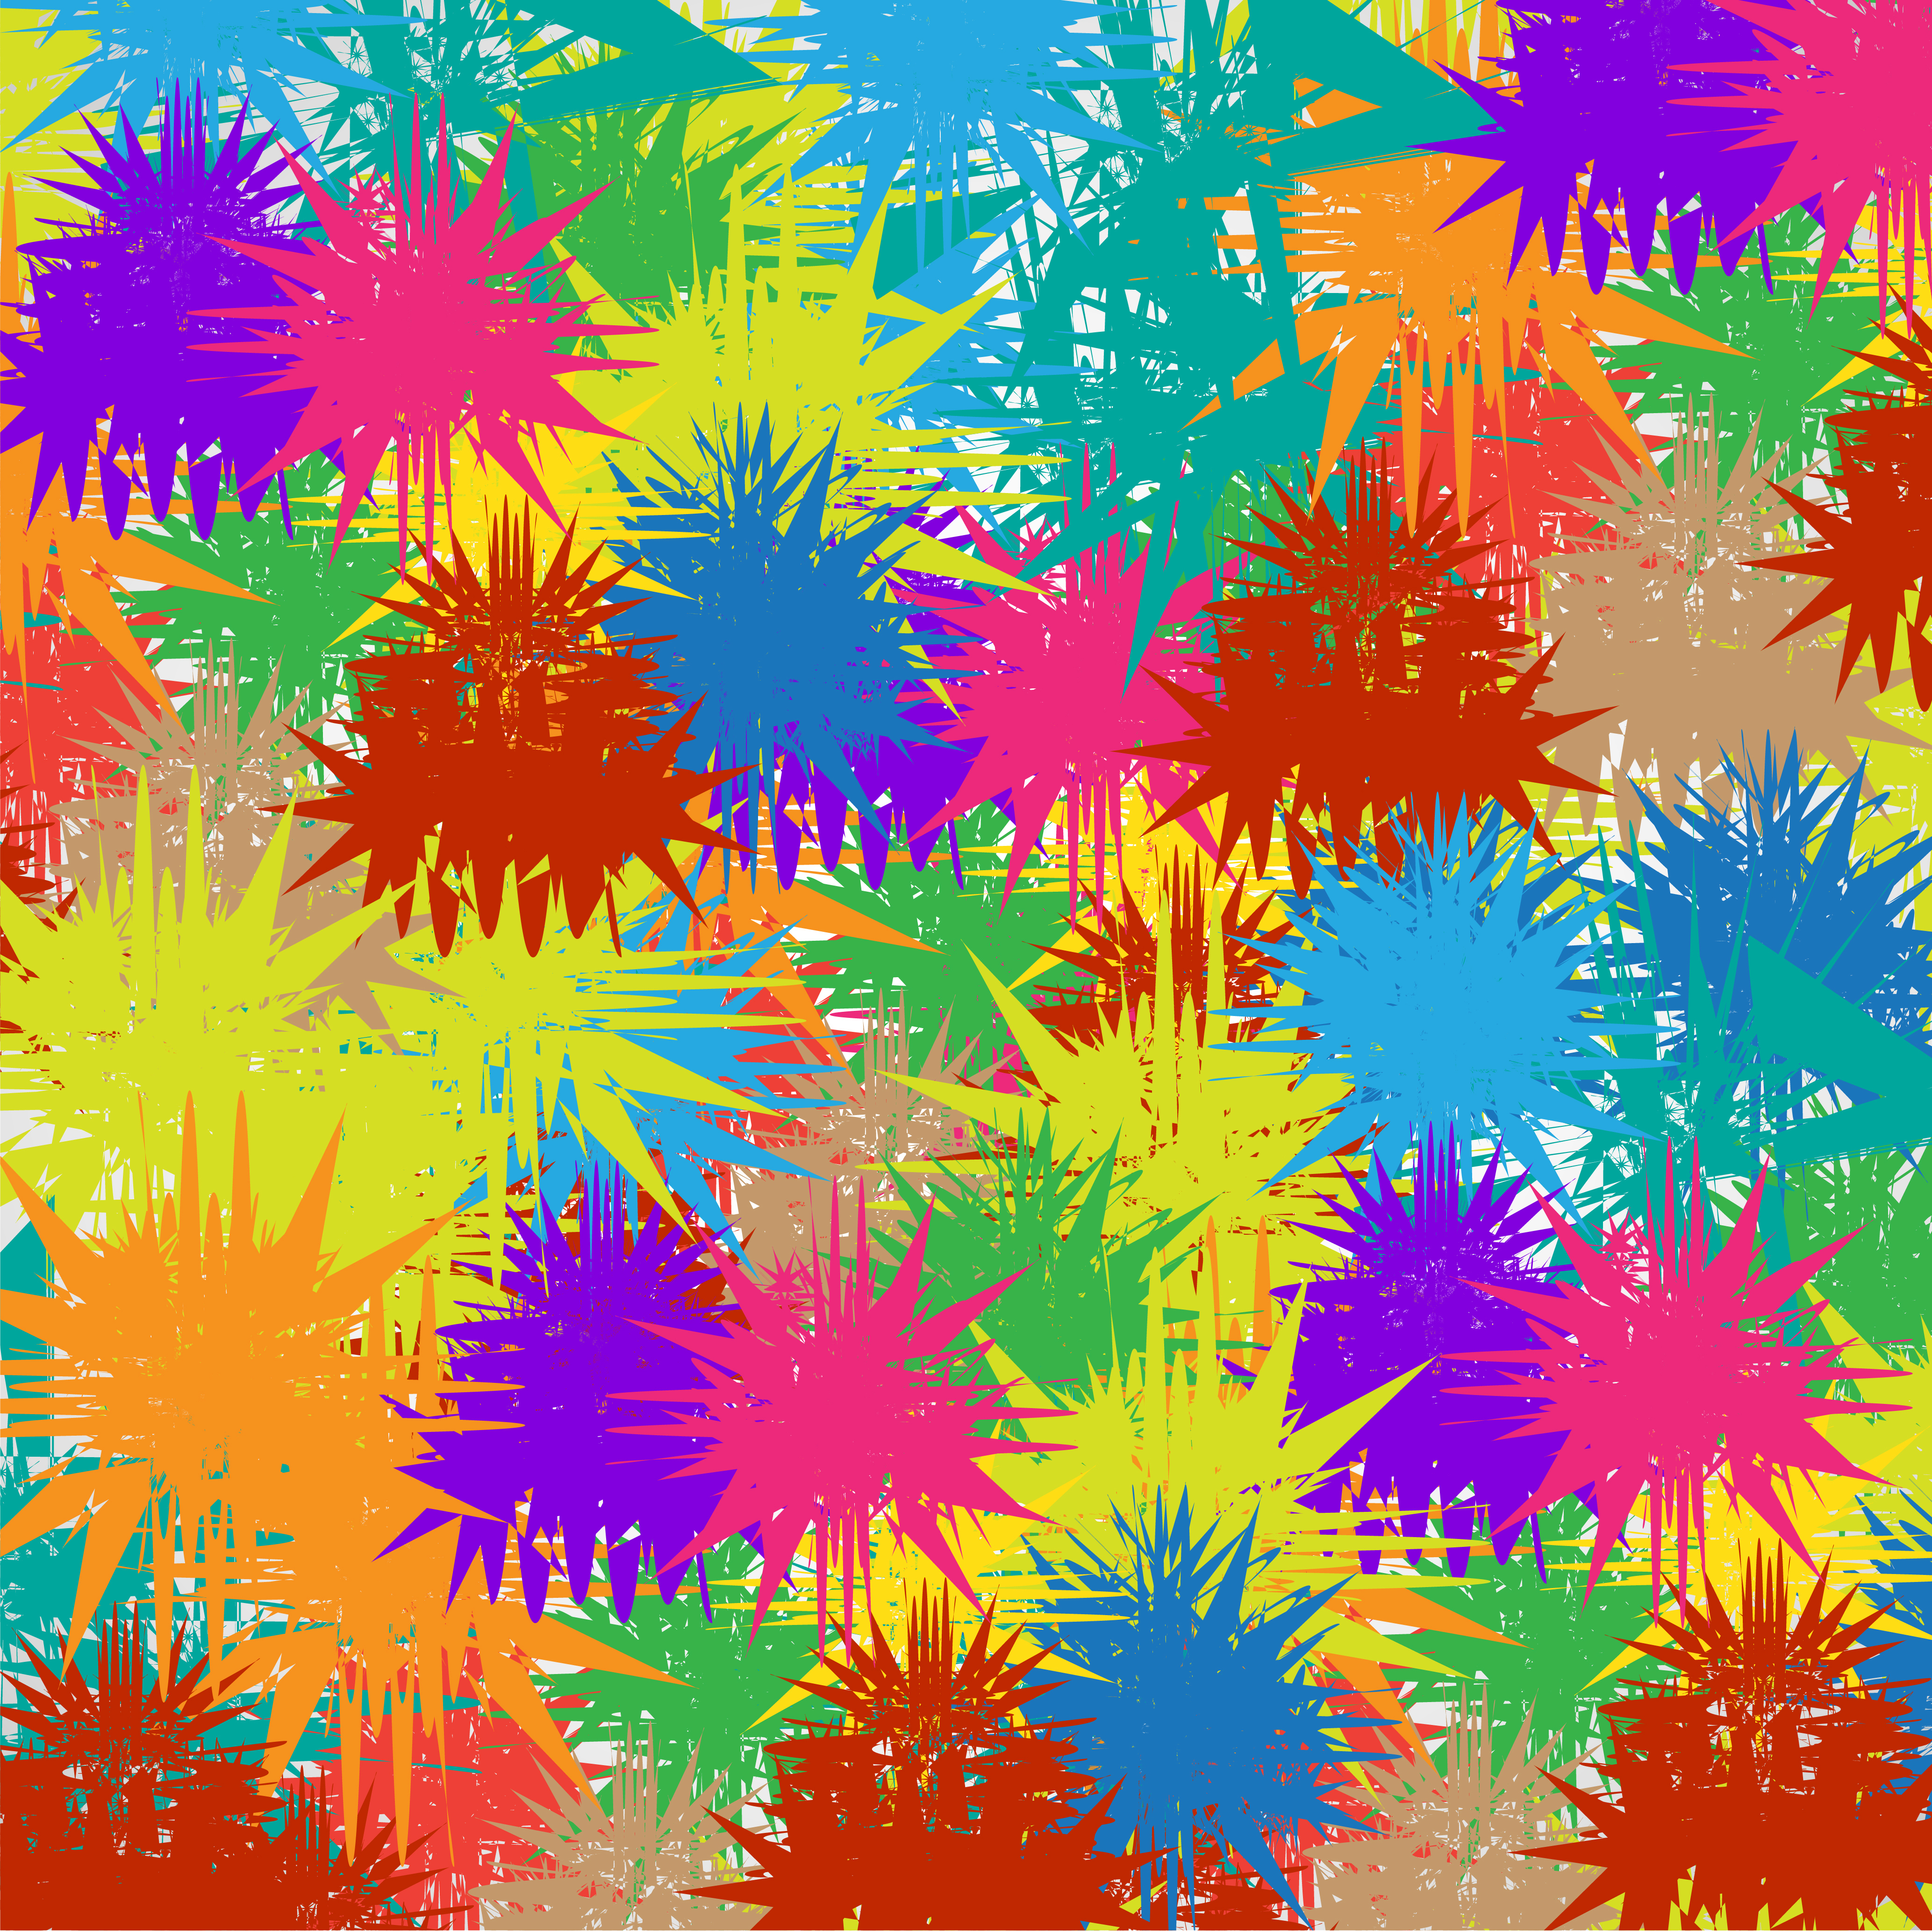 Download Colorful background for advertising, vector - Download Free Vectors, Clipart Graphics & Vector Art